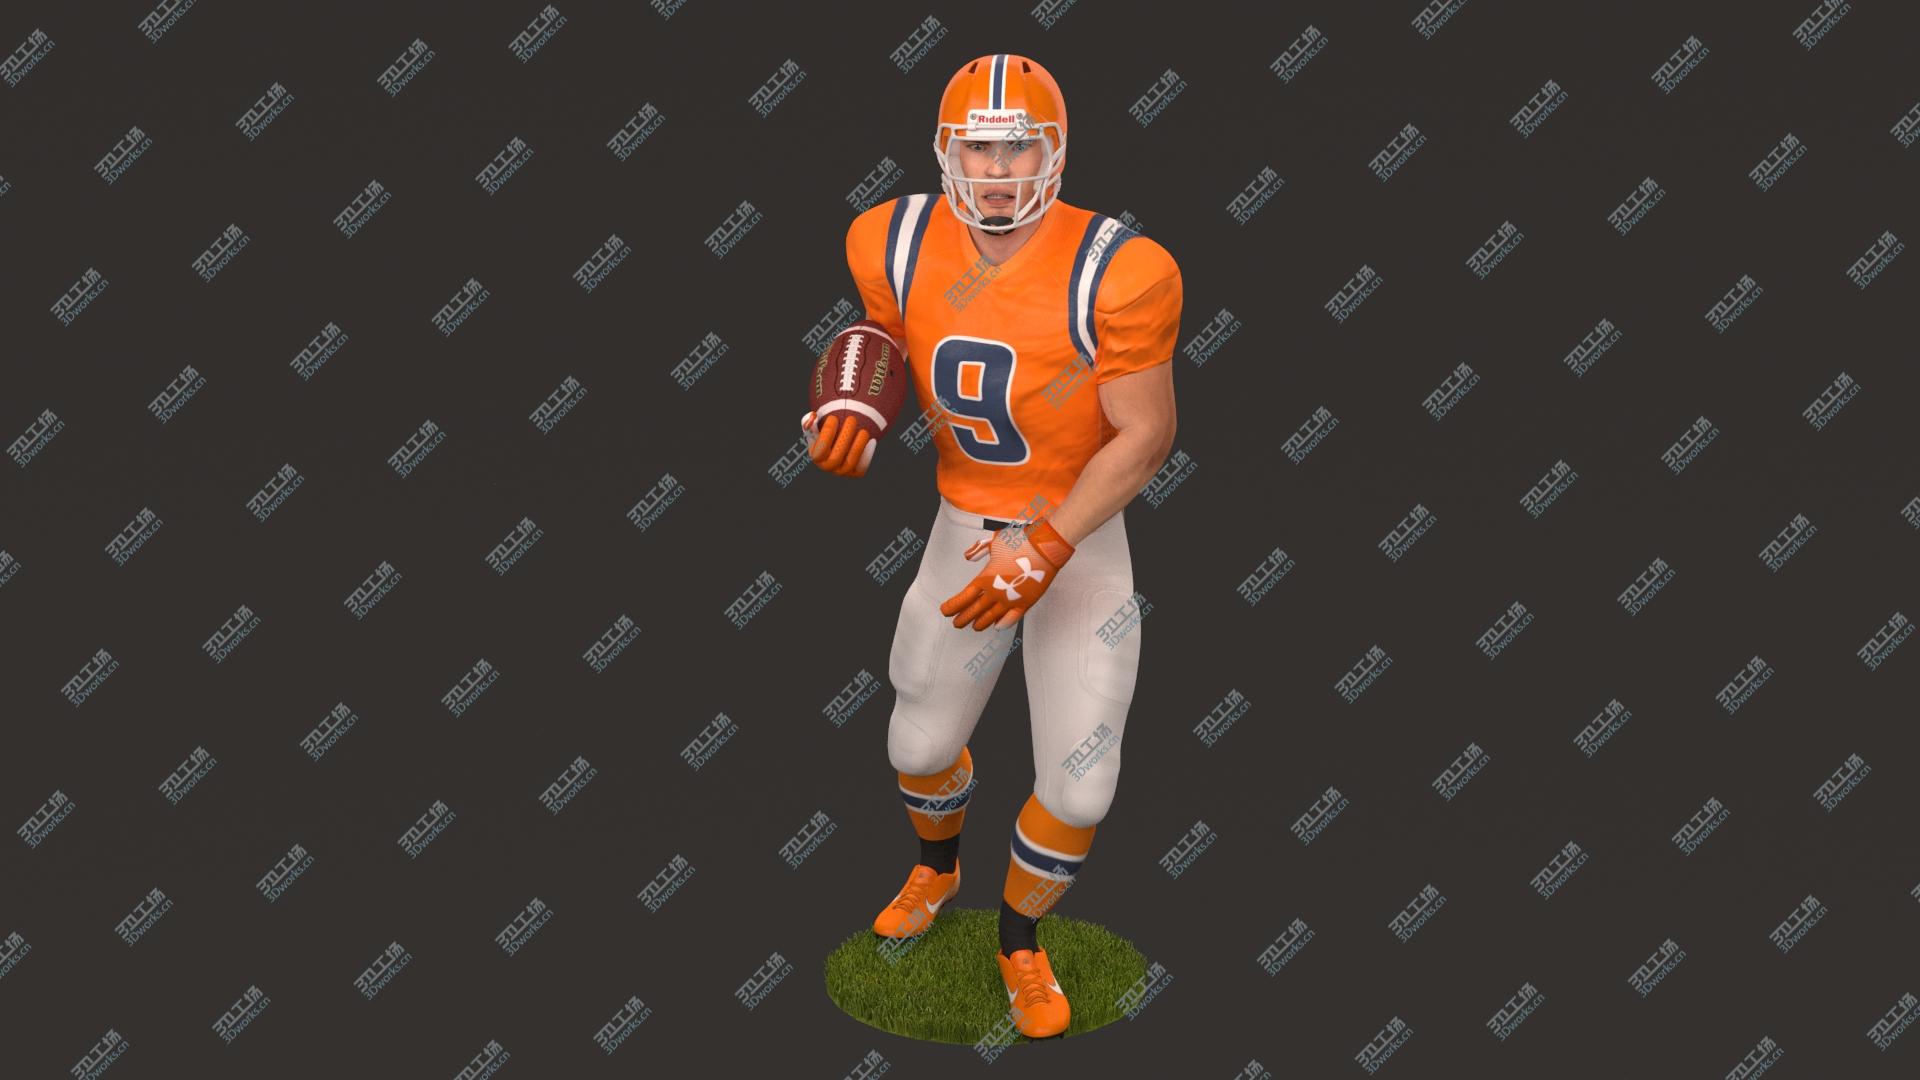 images/goods_img/20210313/3D American Football Player 2020 V6 Rigged/3.jpg